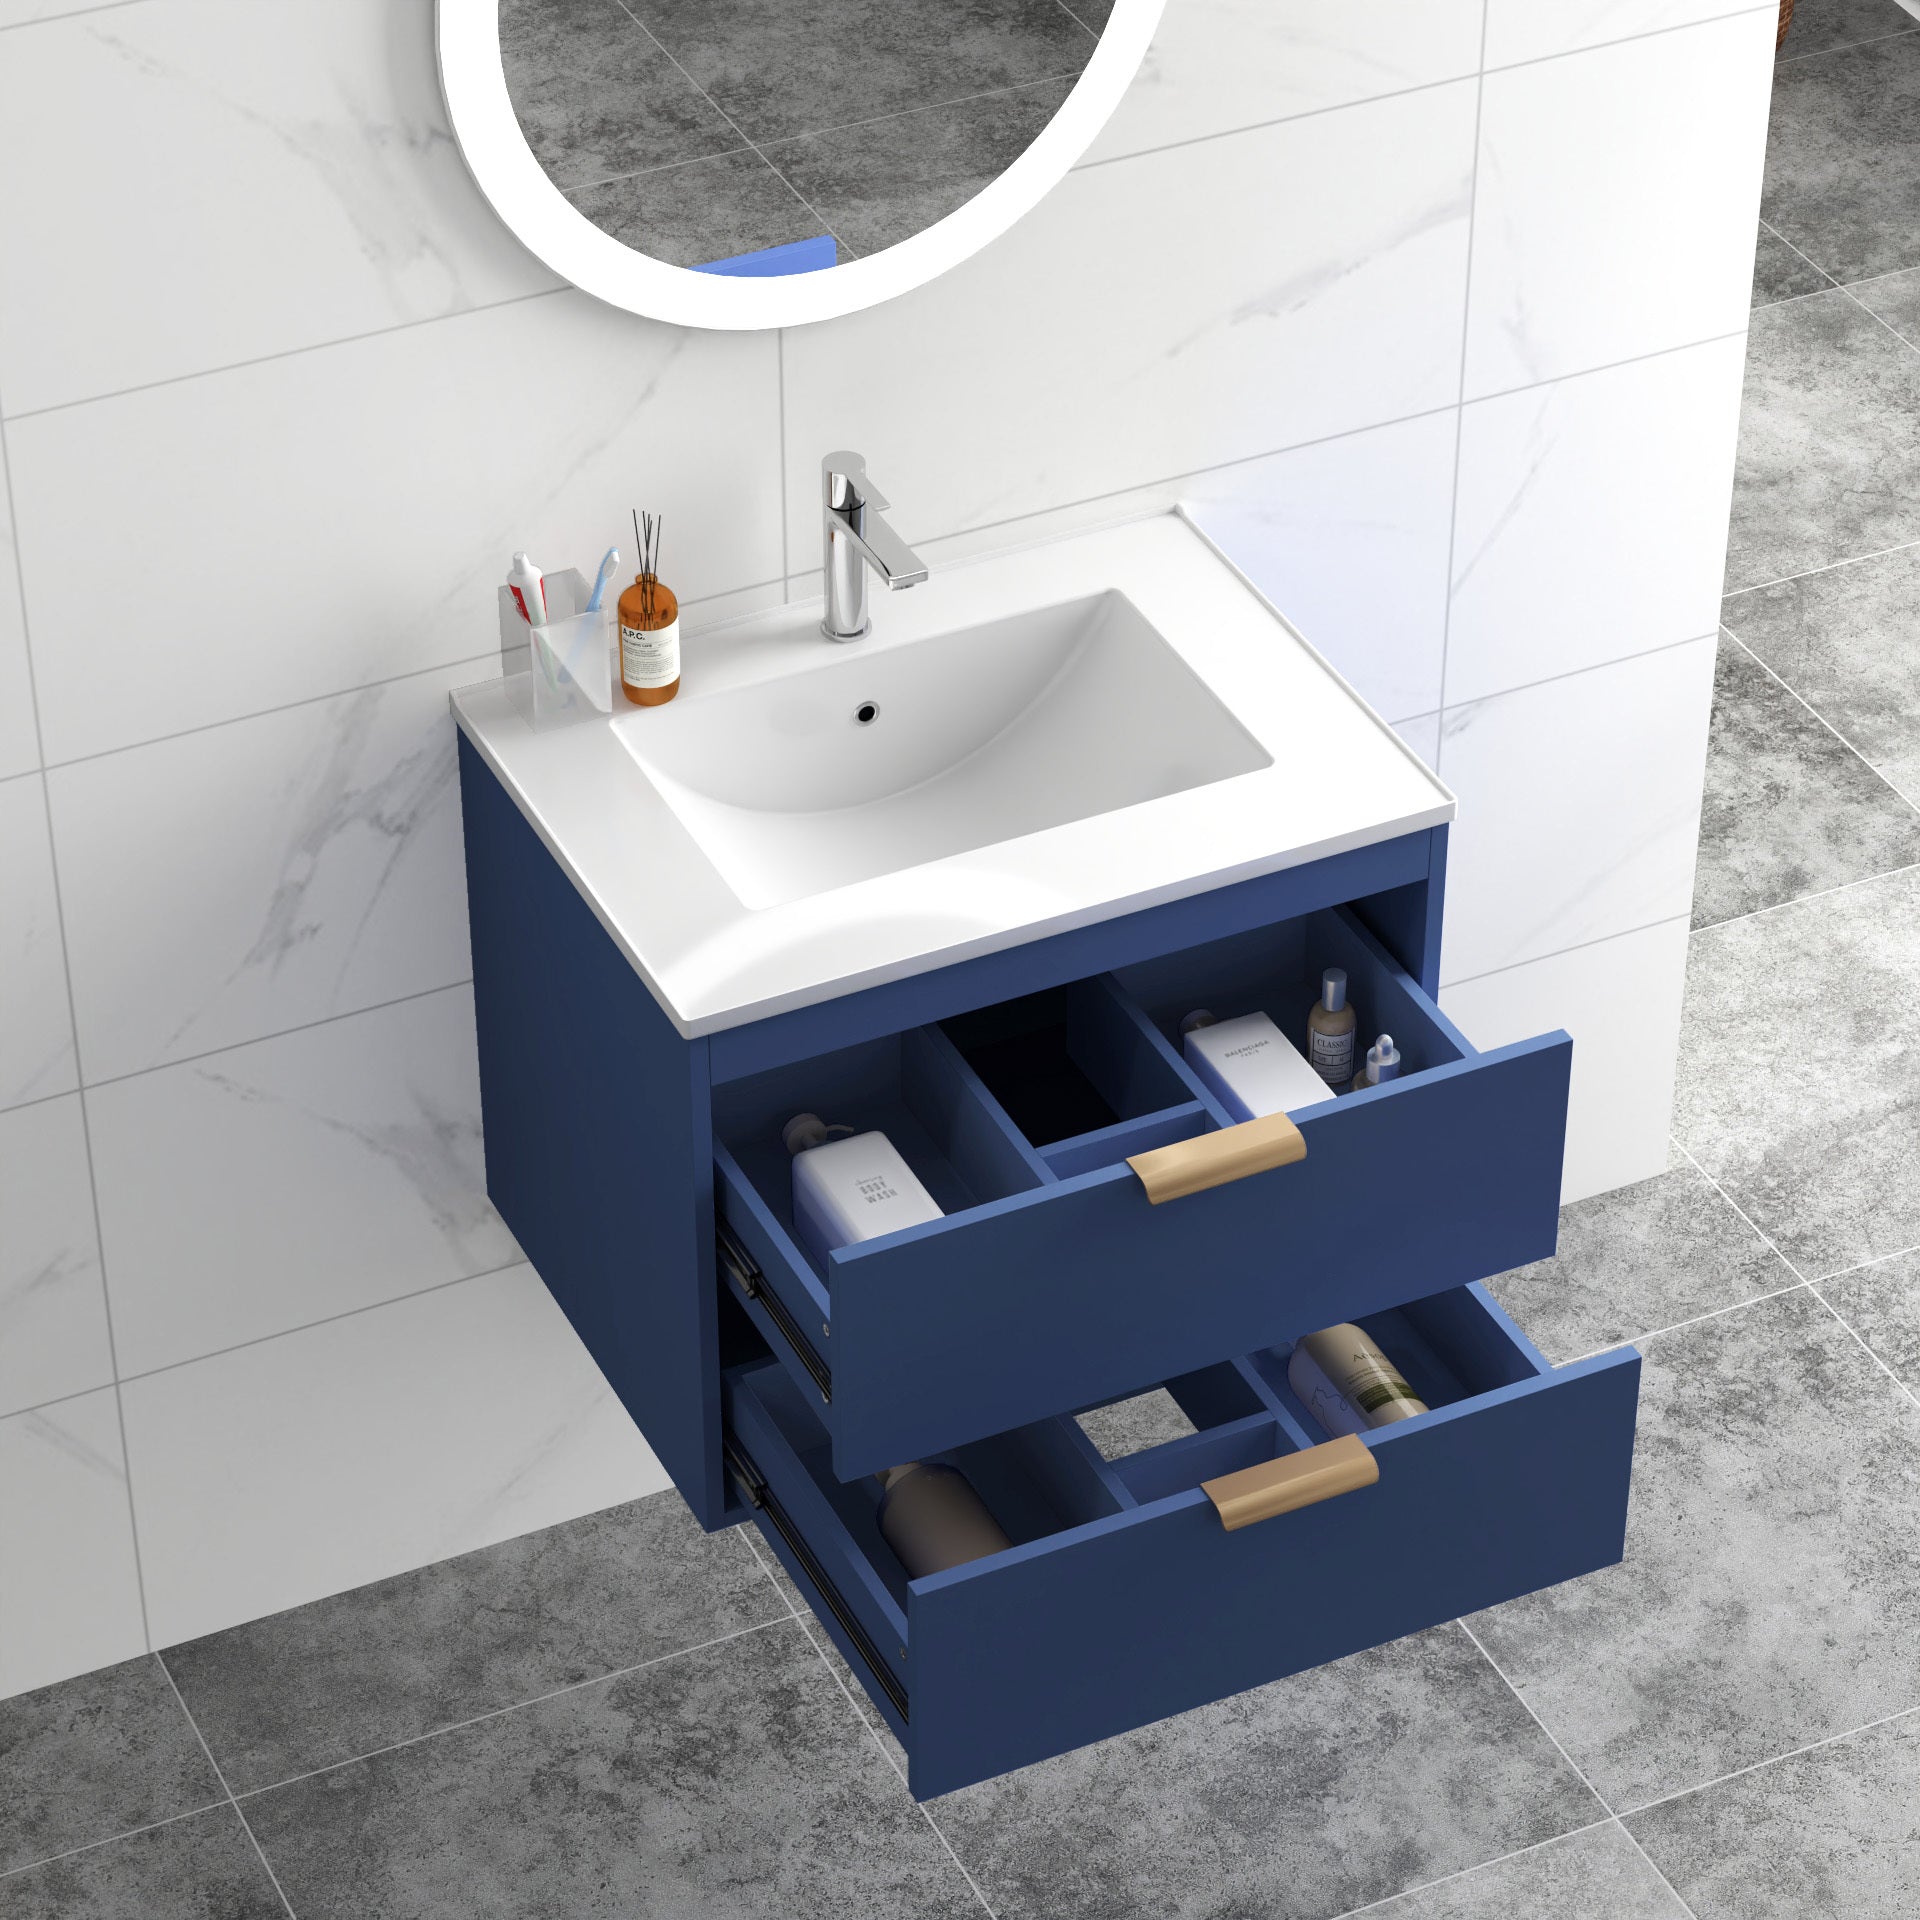 24" floating wall mounted bathroom vanity with white blue-wall mounted-ceramic+mdf